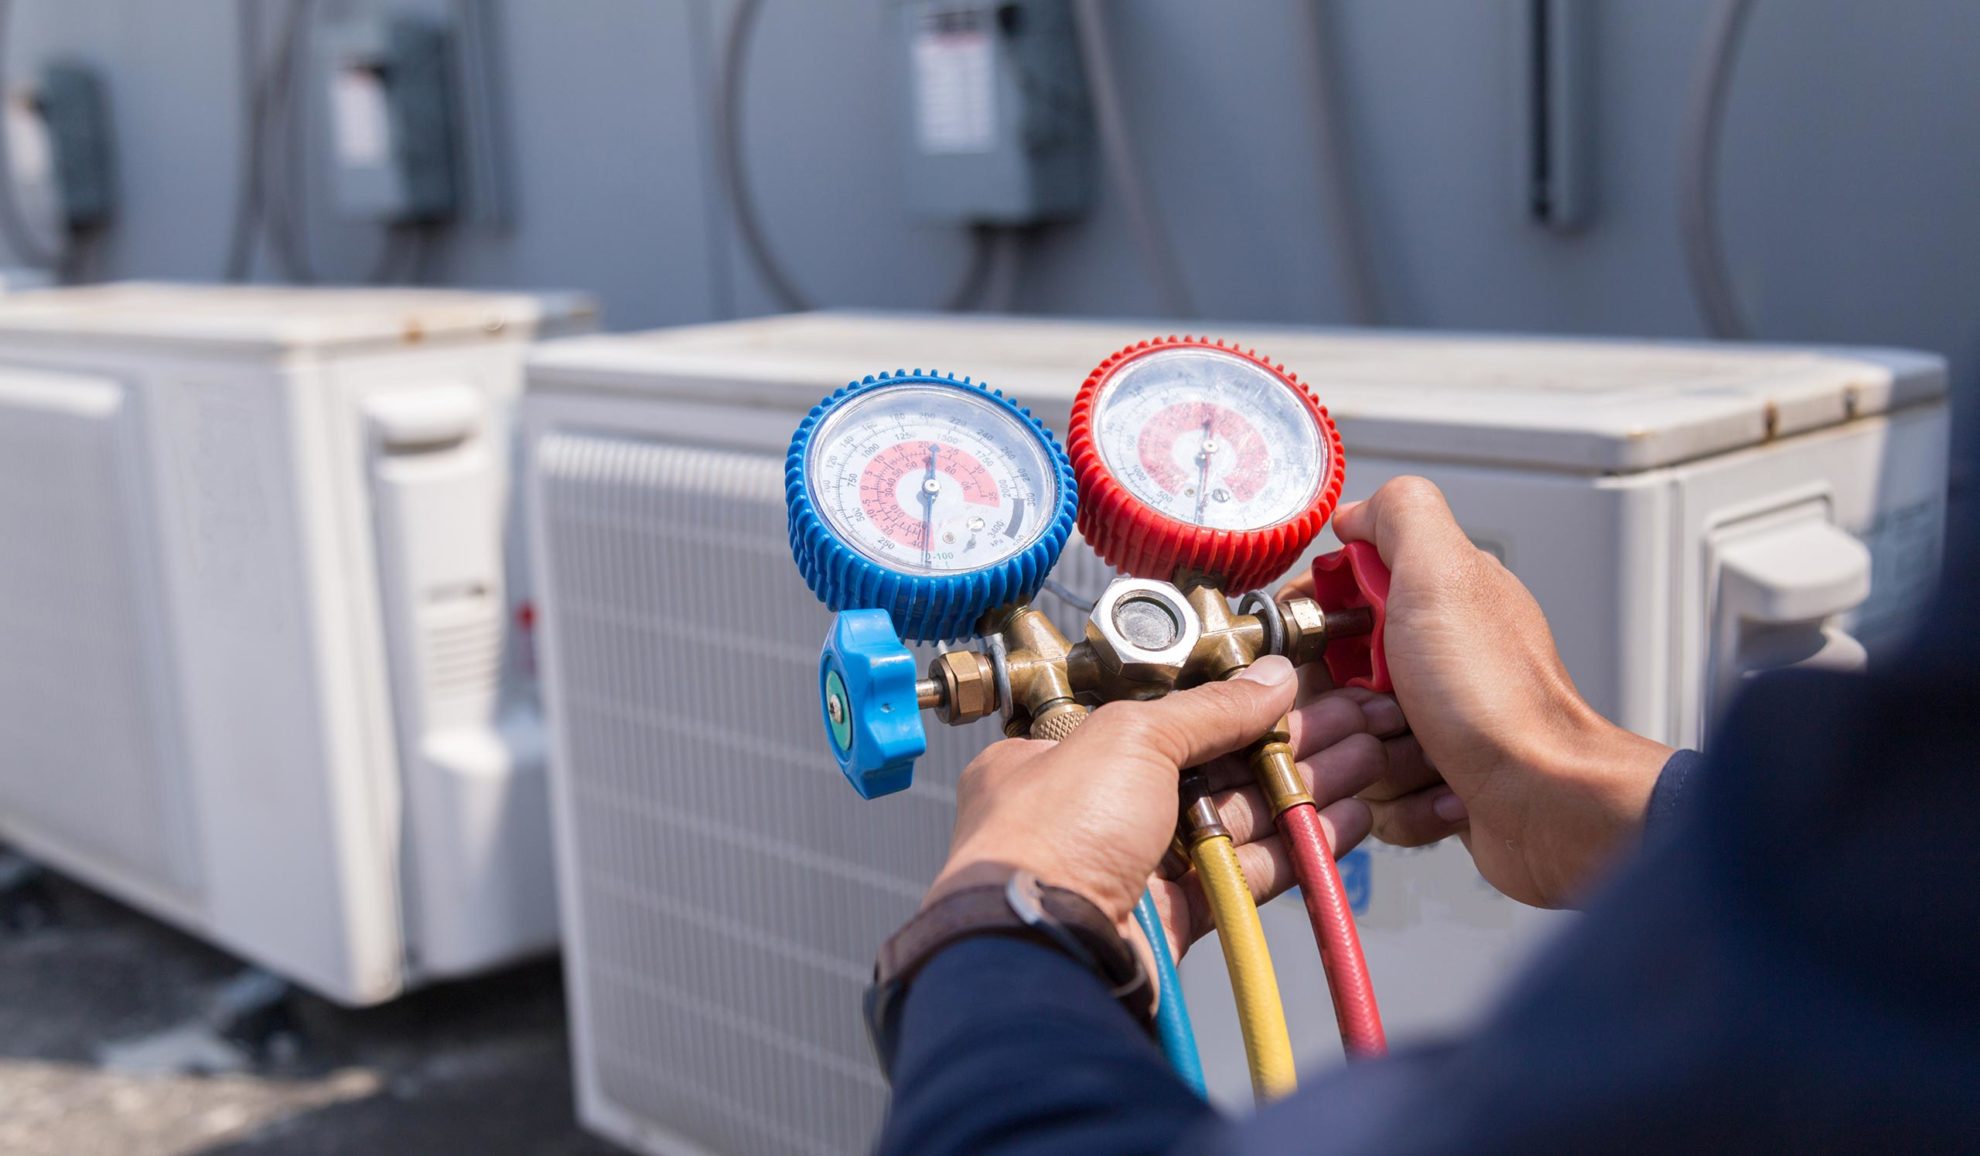 technician-repairing-air-conditioner-at-building-roof-pflugerville-tx